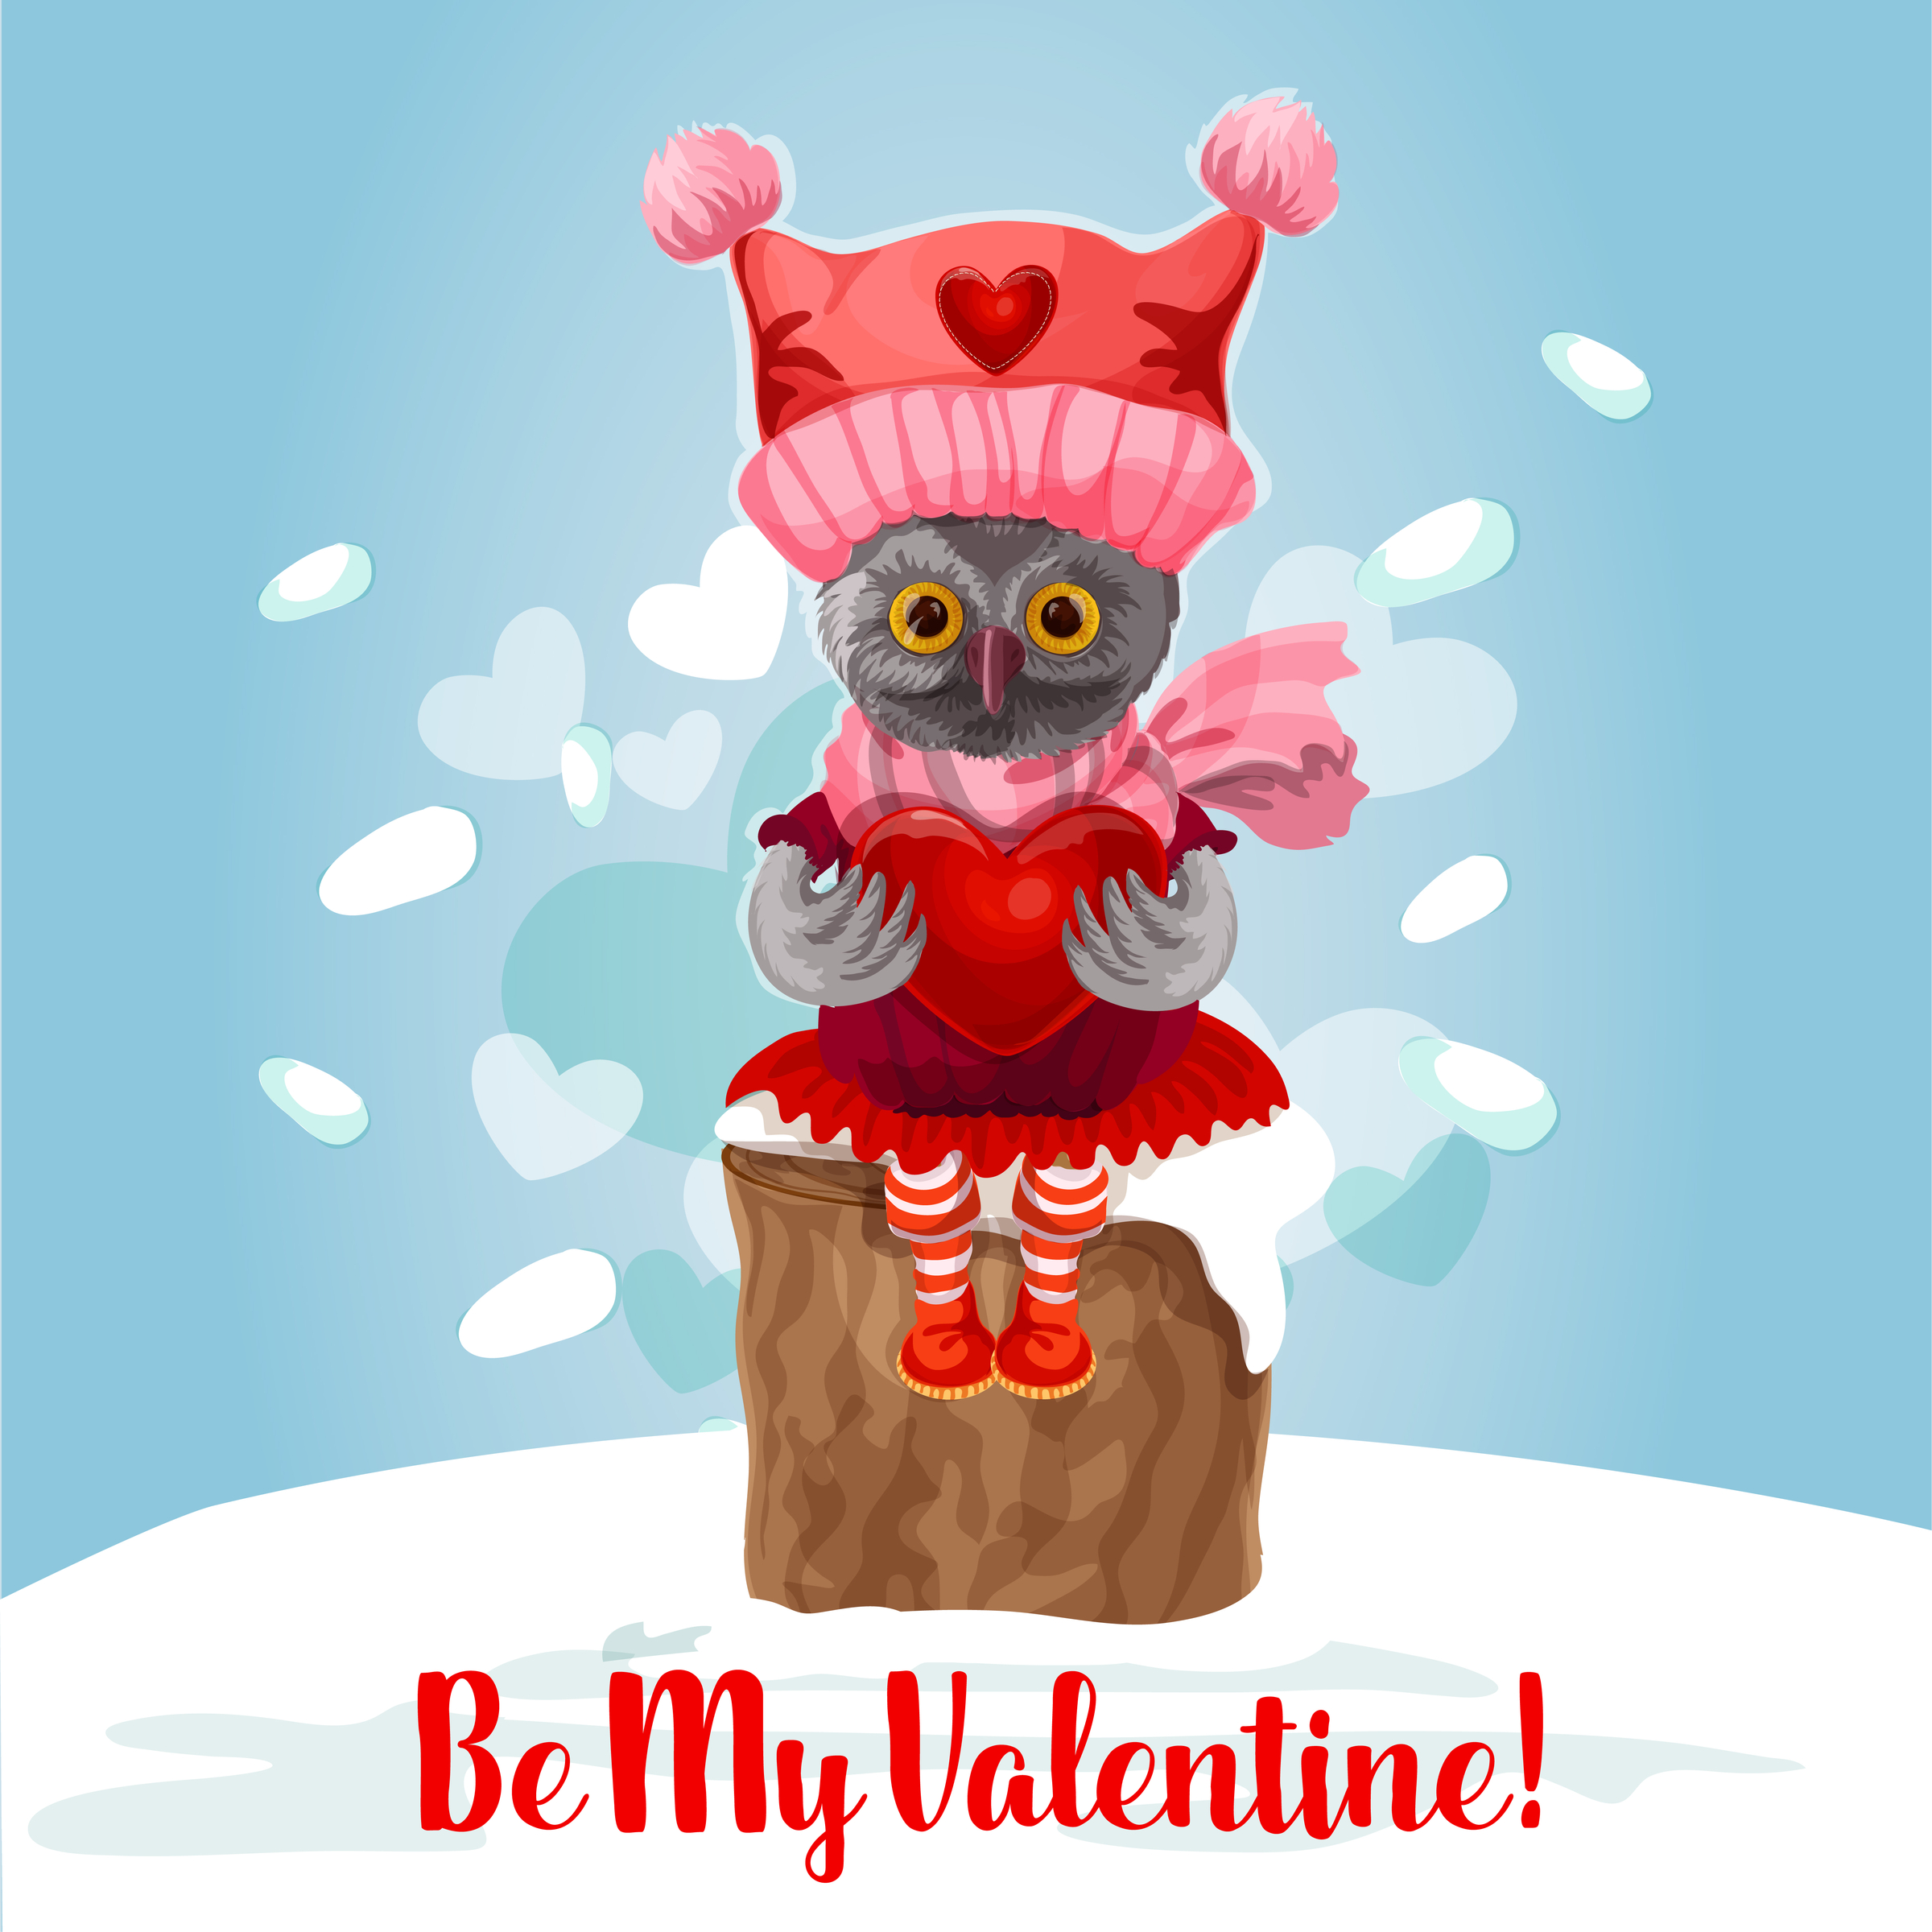 Owl dressed in Valentine clothing with "Be My Valentine" at bottom.